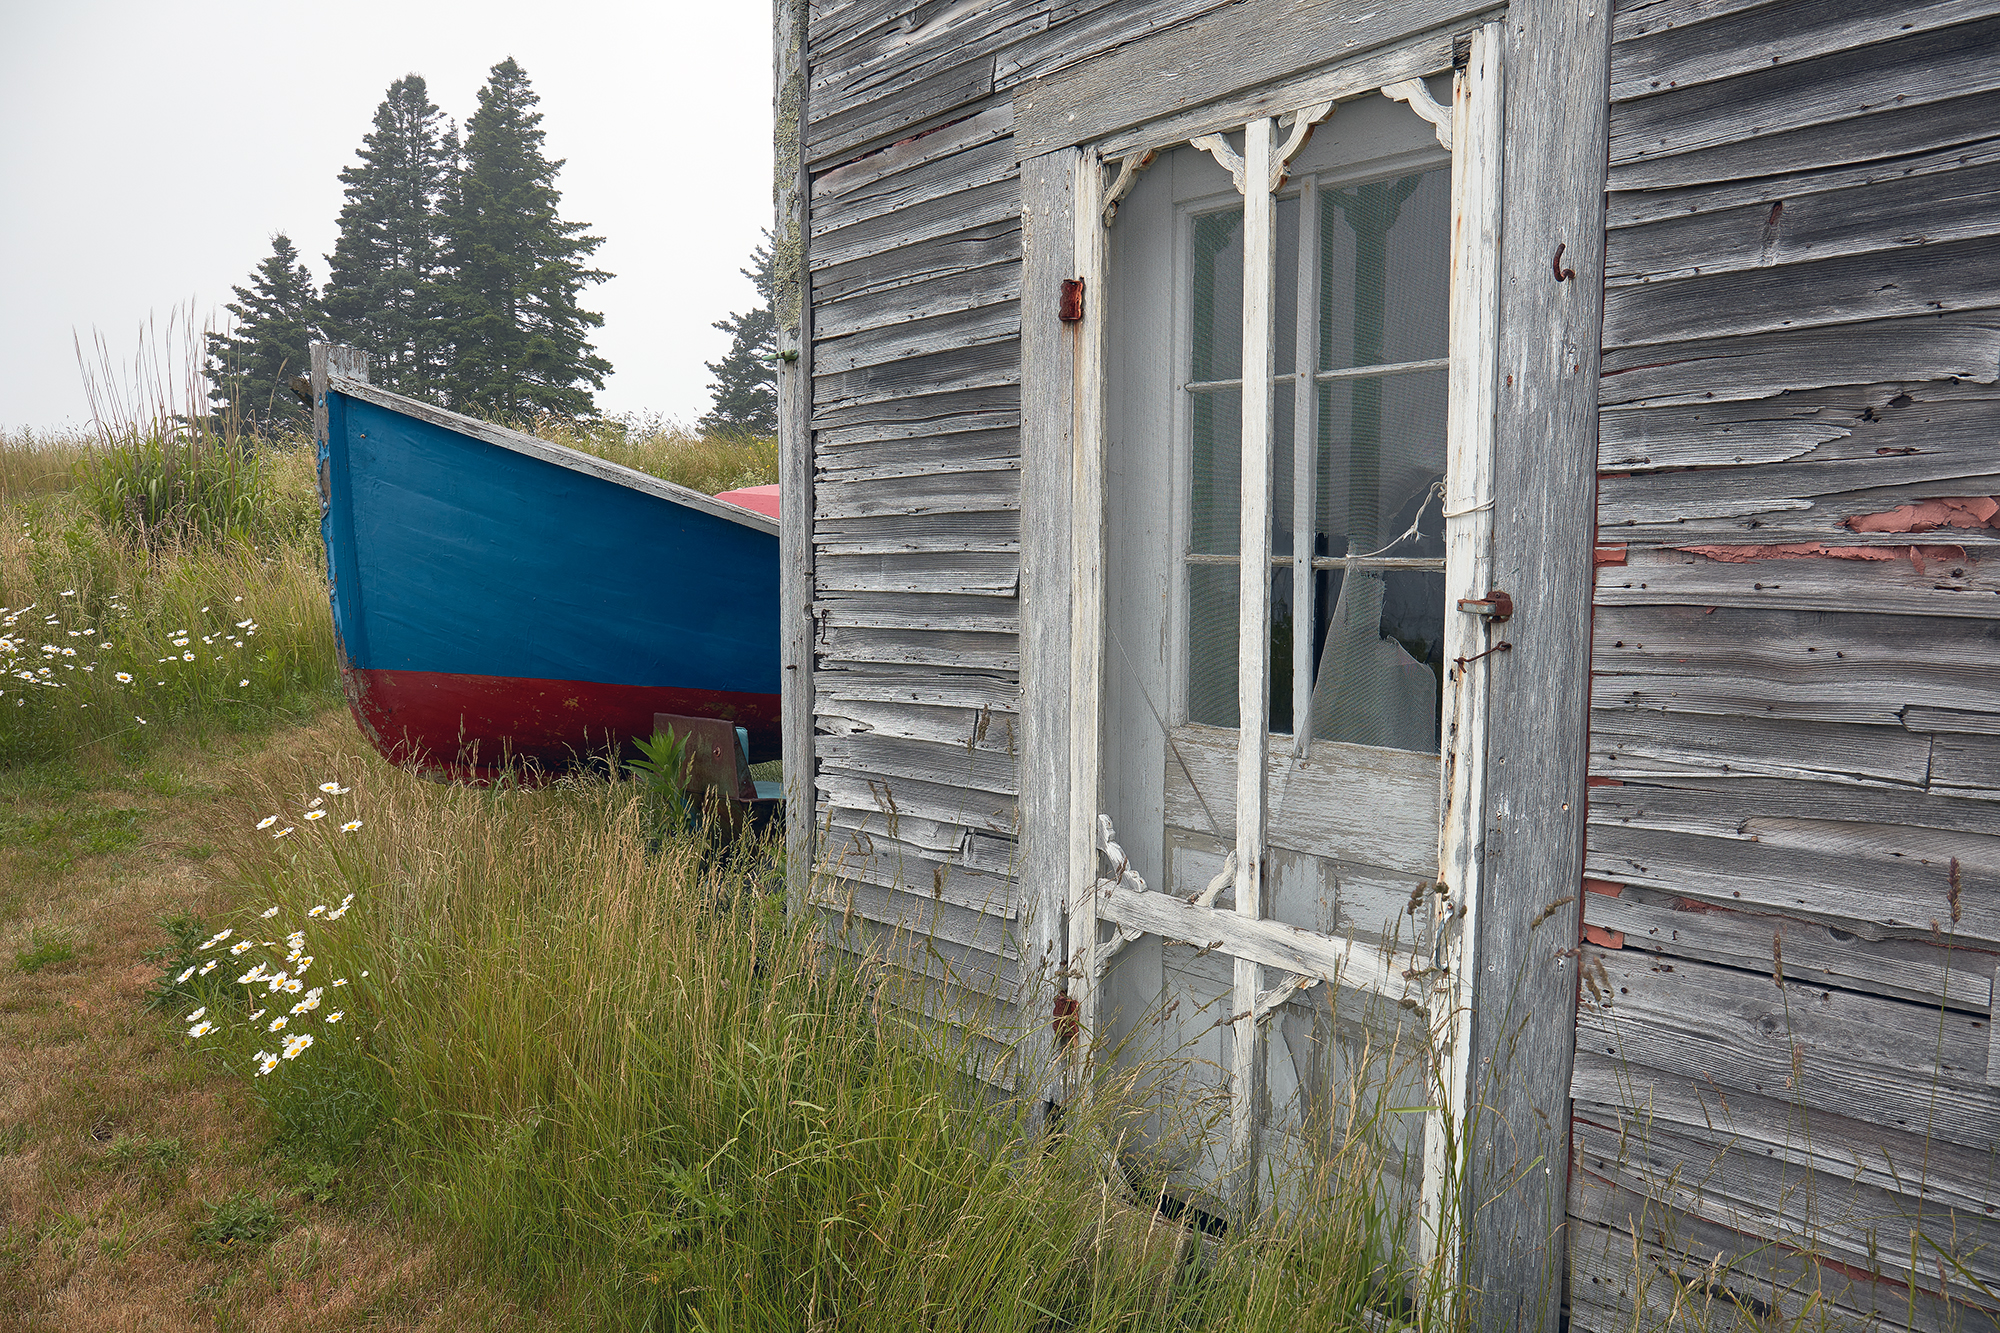 A blue and red boat lies next to a ramshackle door with broken windows. The wooden walls of the building are rotting away, and the grass surrounding the building is overgrown.